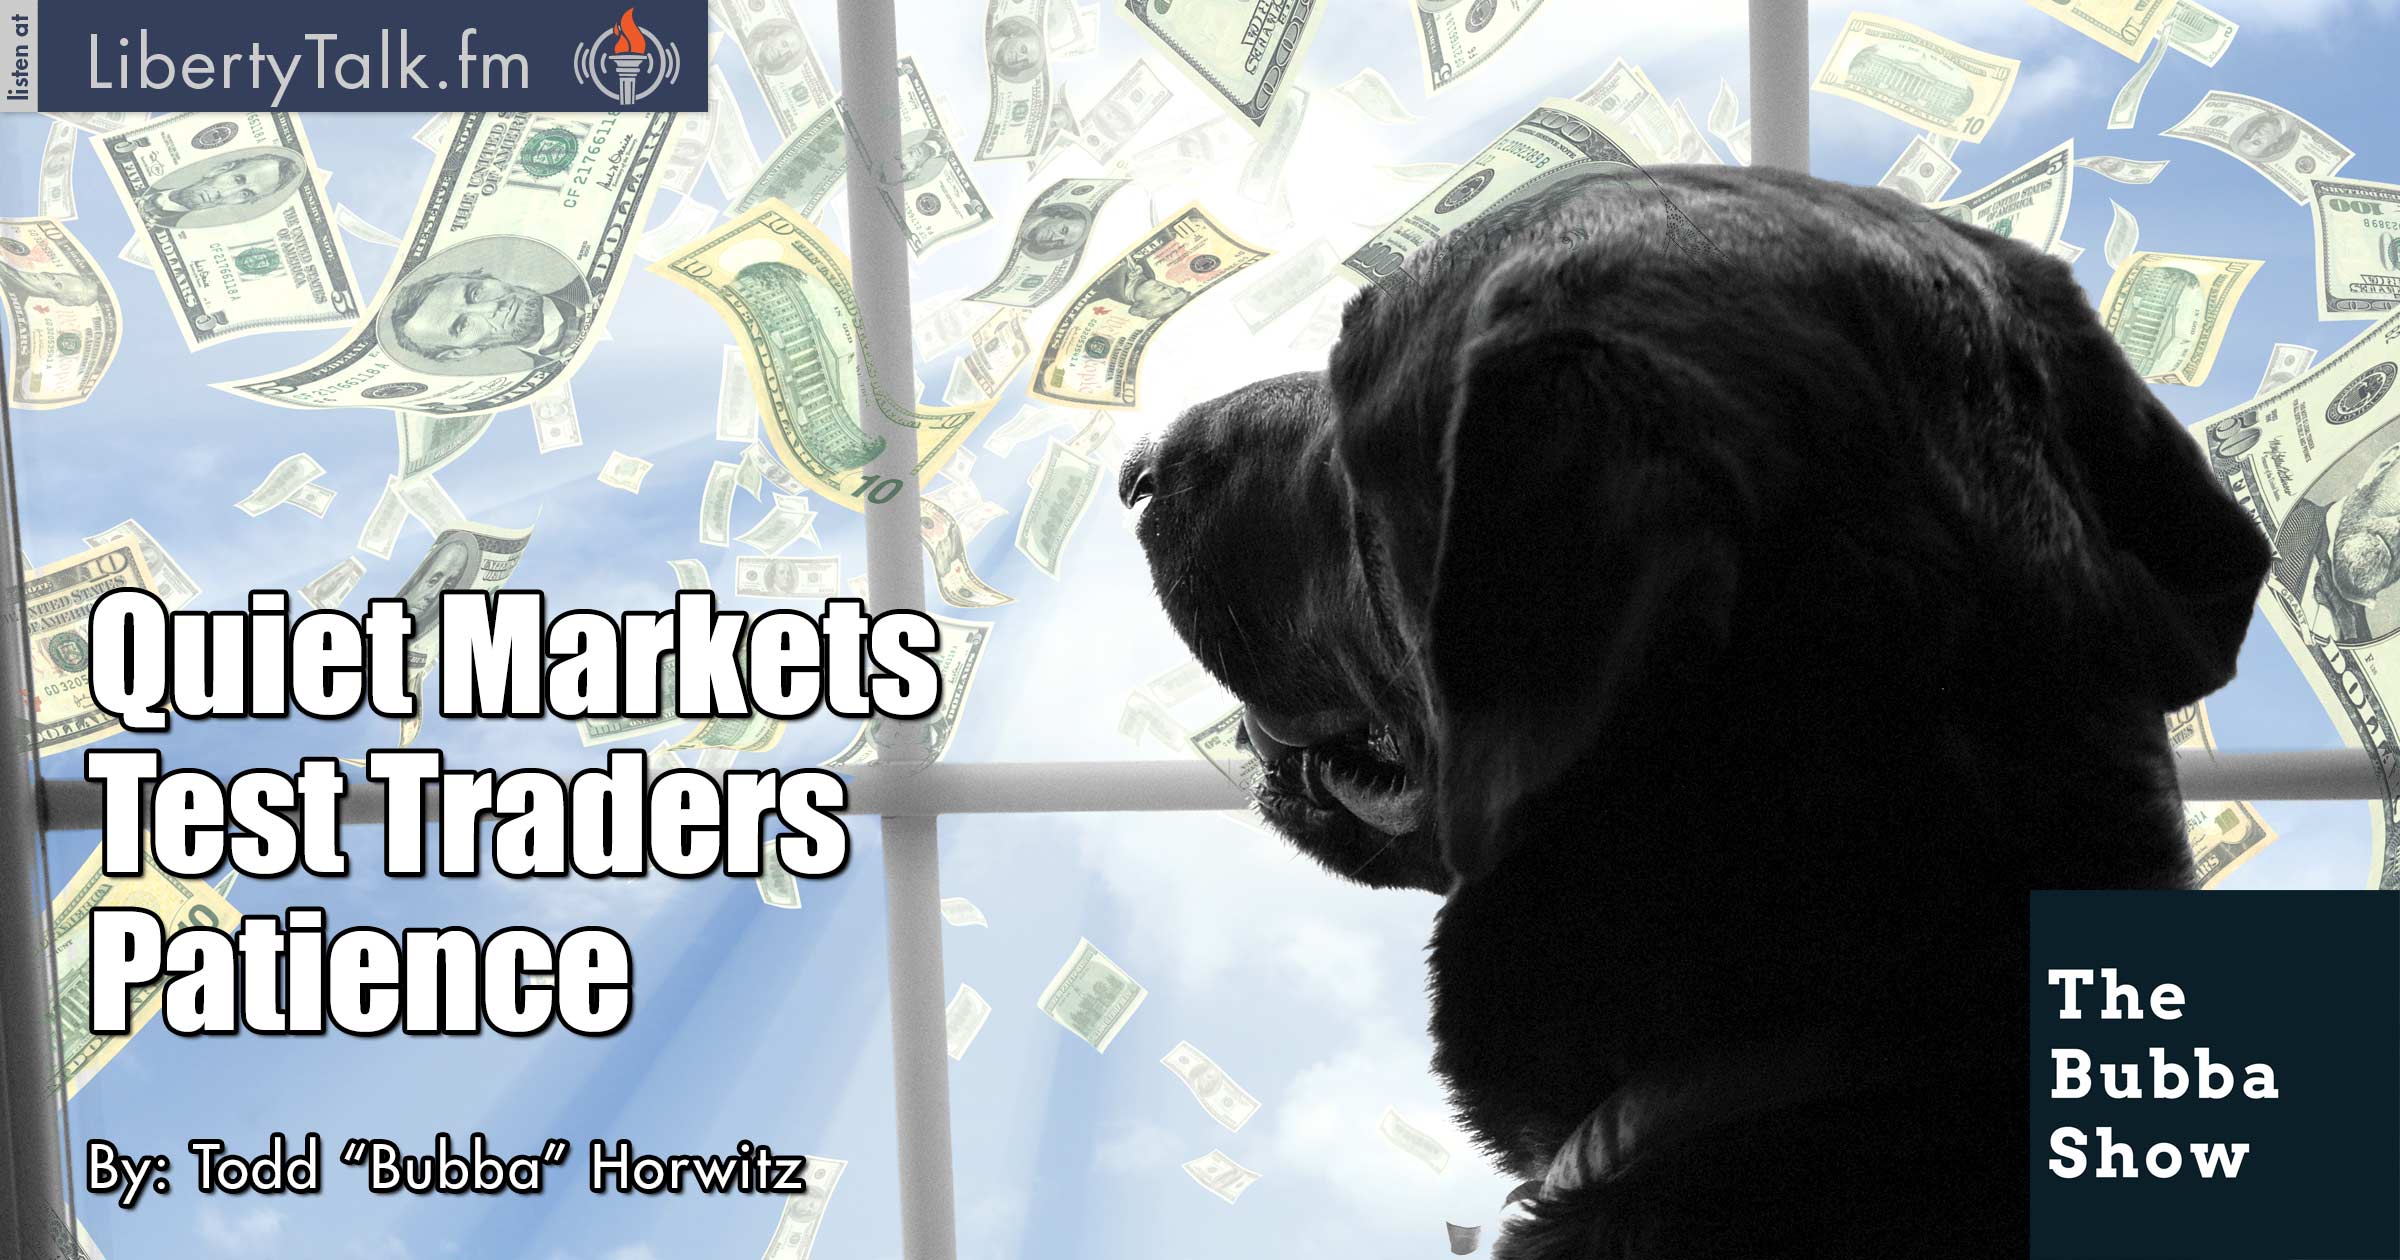 Quiet Markets Test Traders Patience - The Bubba Show